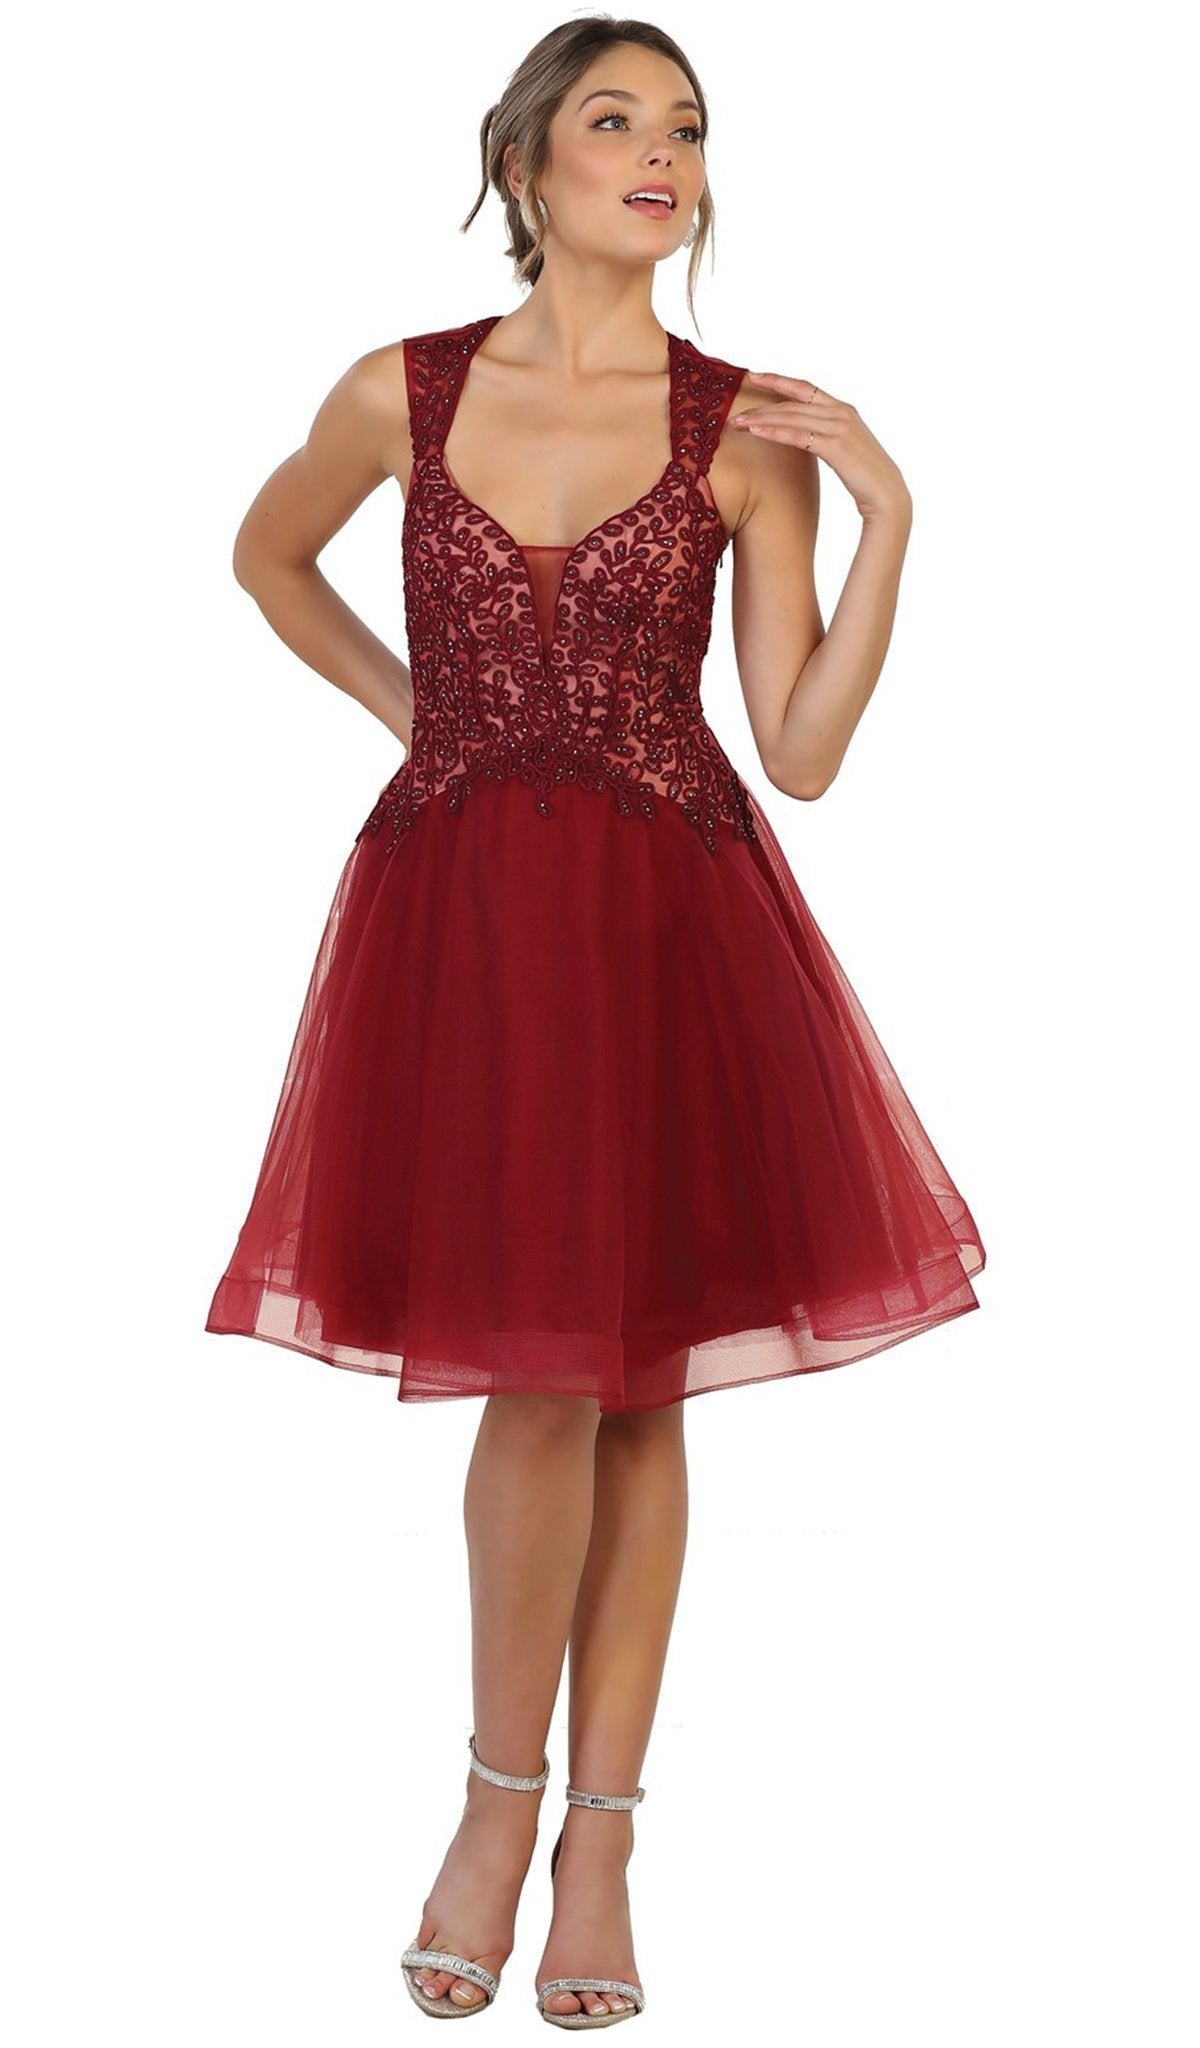 May Queen - Jeweled V-neck A-line Cocktail Dress Special Occasion Dress 4 / Burgundy